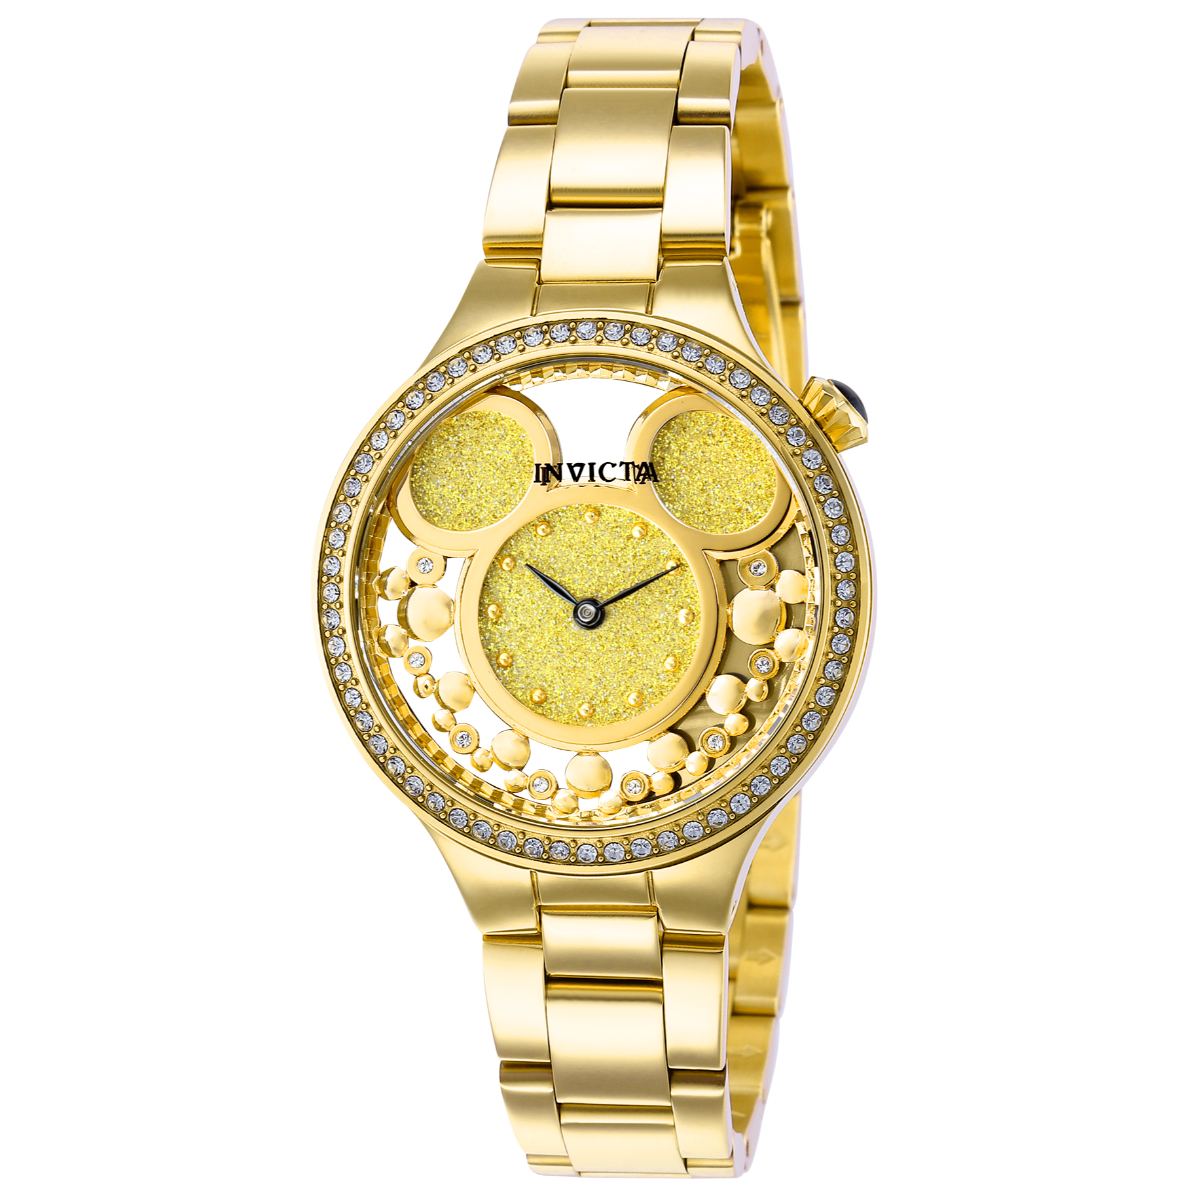 Invicta Disney Limited Edition Women's Watch - 35mm, Gold (36262)